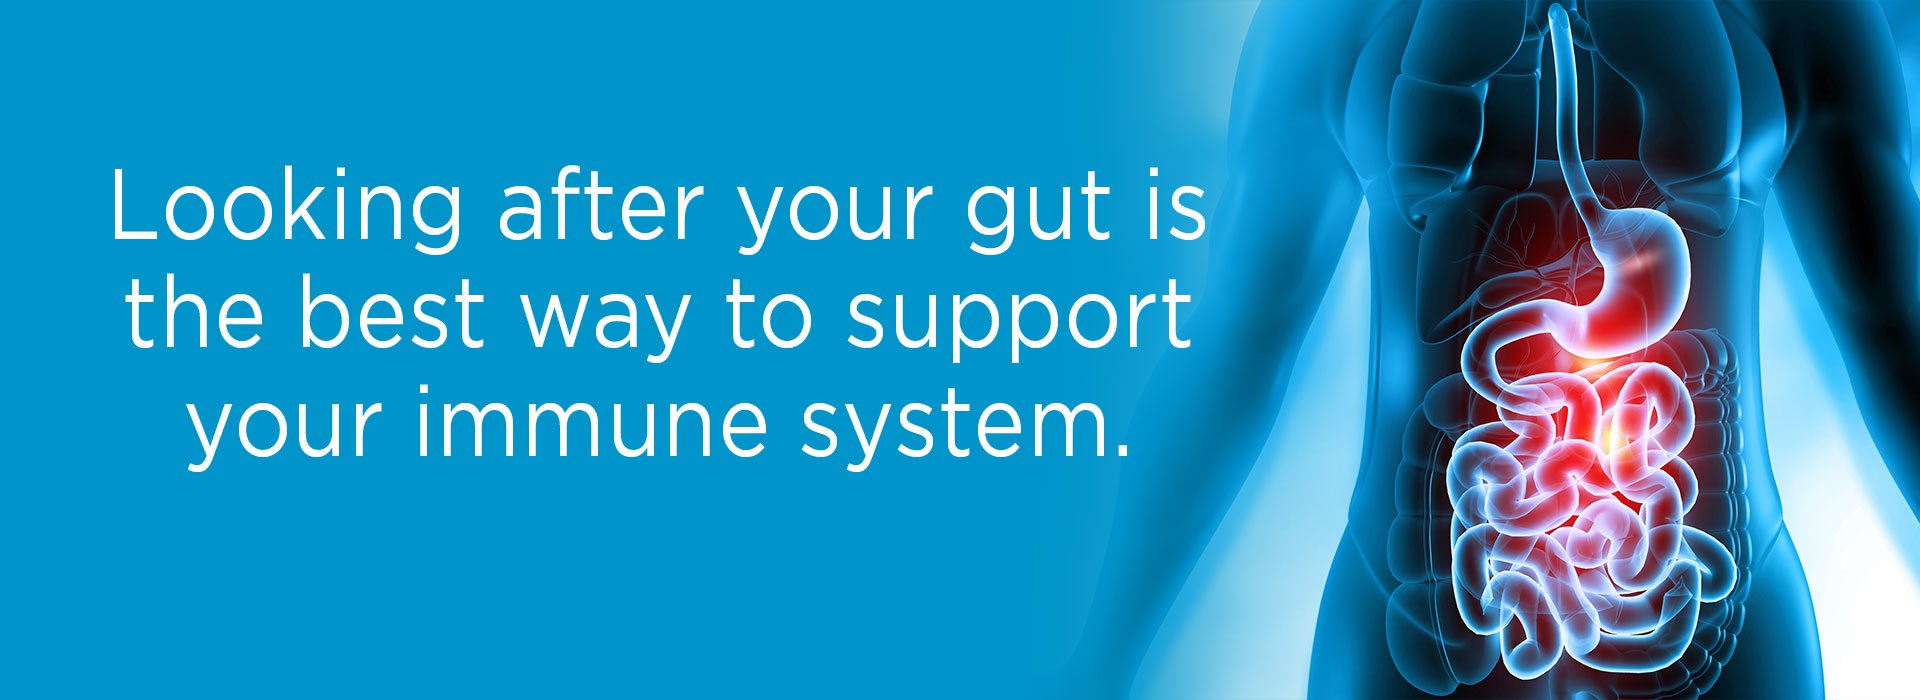 New Image International:Looking after your gut is the best way to support your immune system